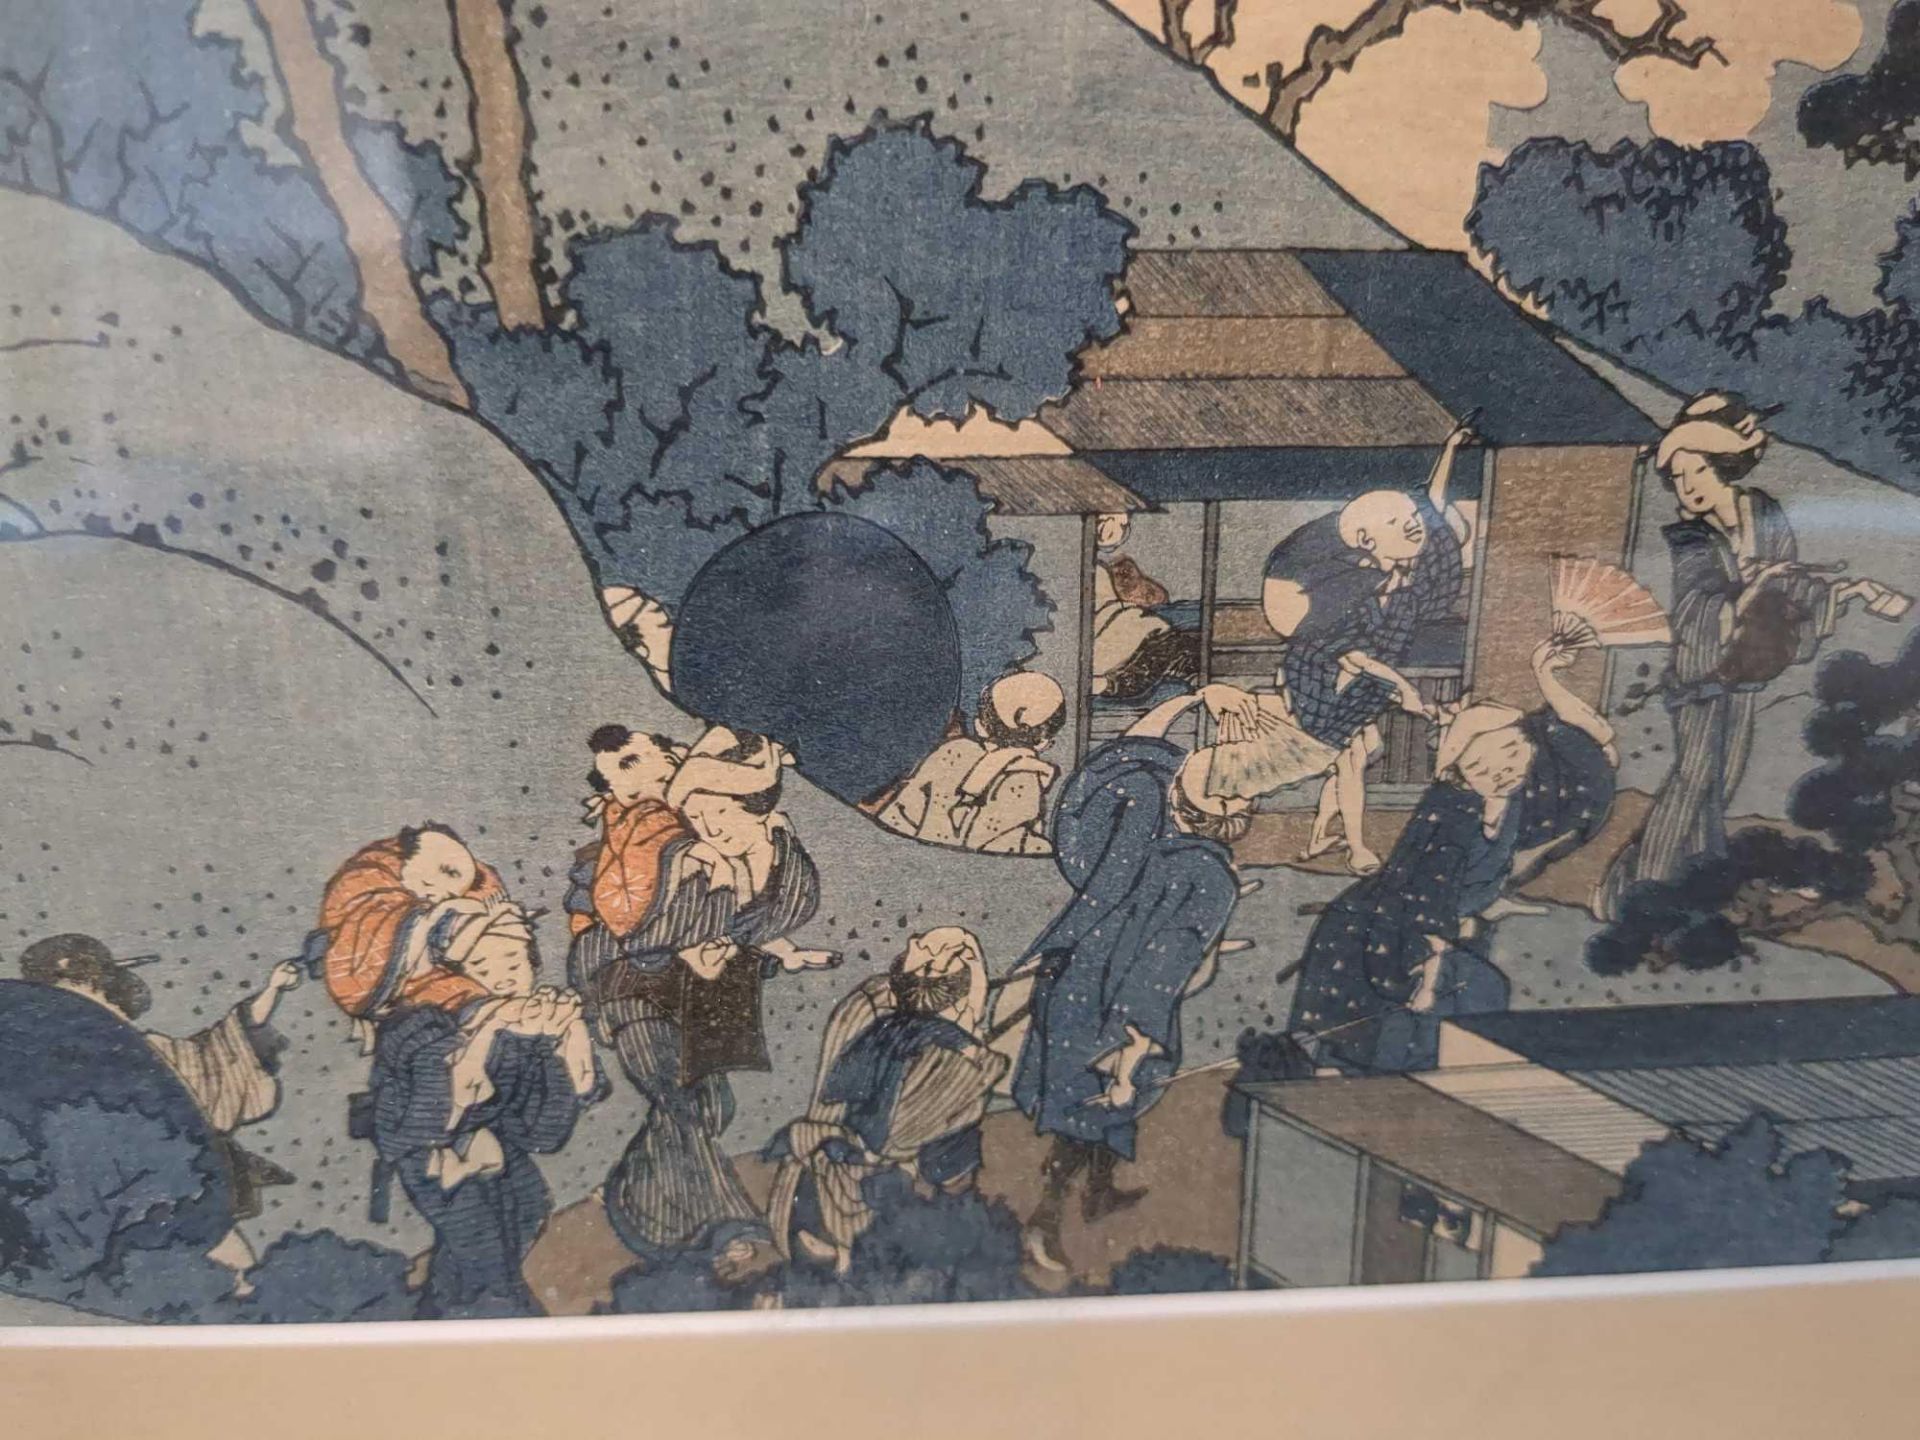 Art: Framed Asian woodblock water color - Image 3 of 6